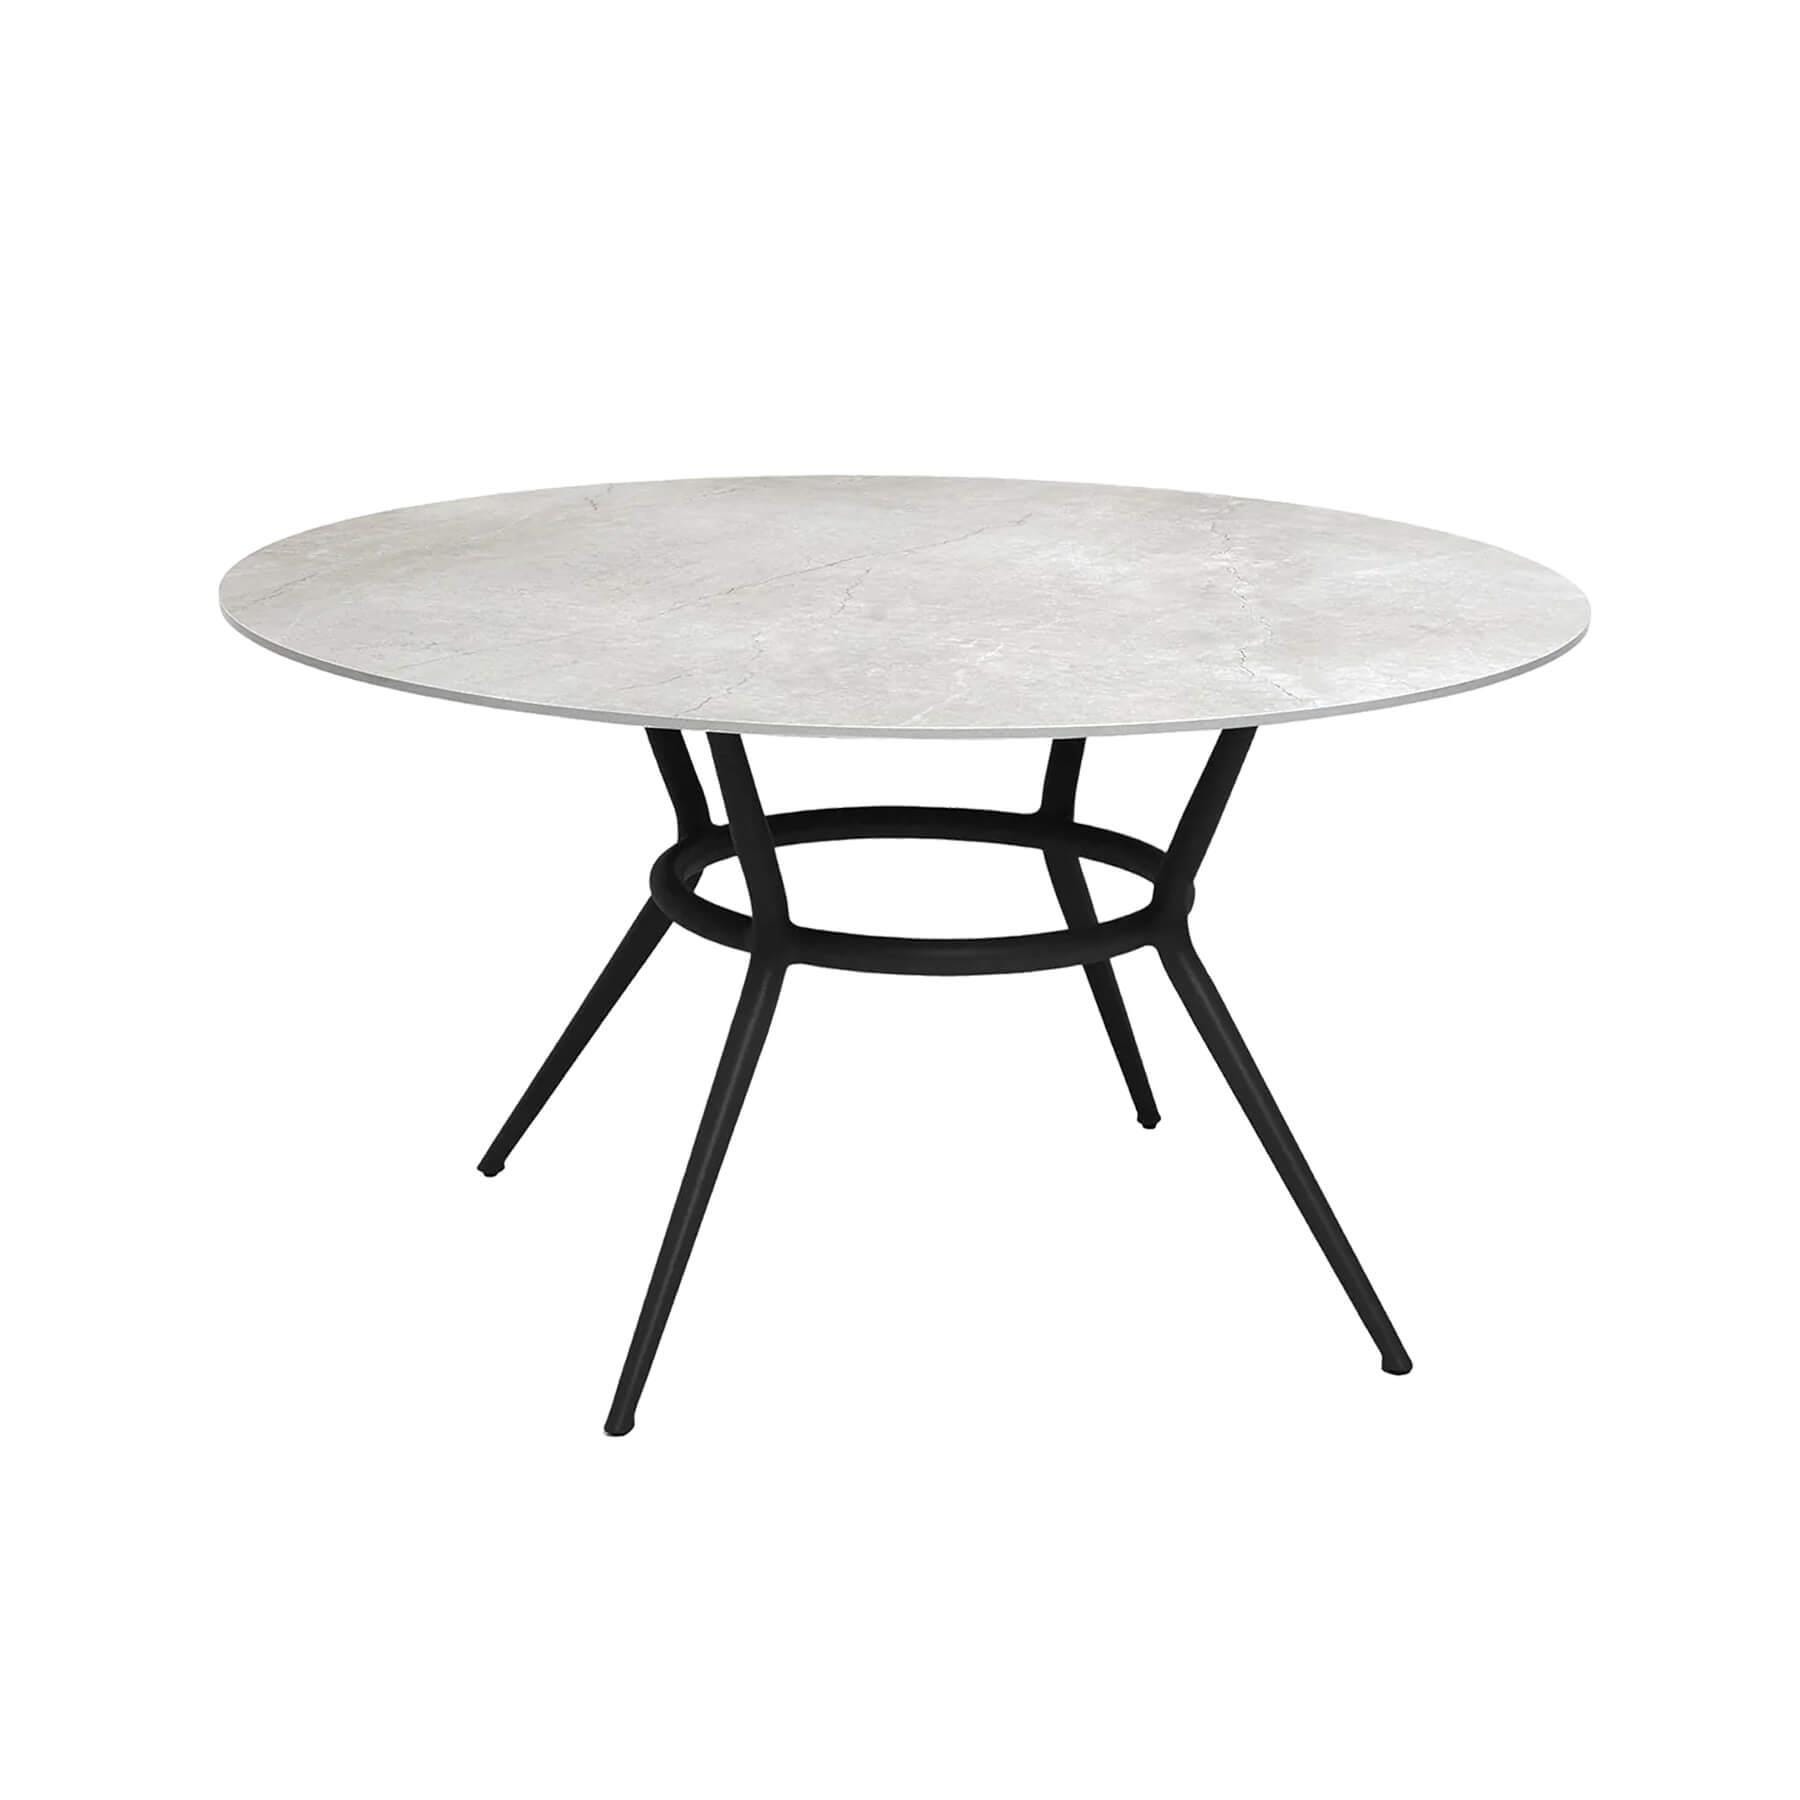 Caneline Joy Outdoor Dining Table Round Ceramic Fossil Grey Top Lava Grey Legs